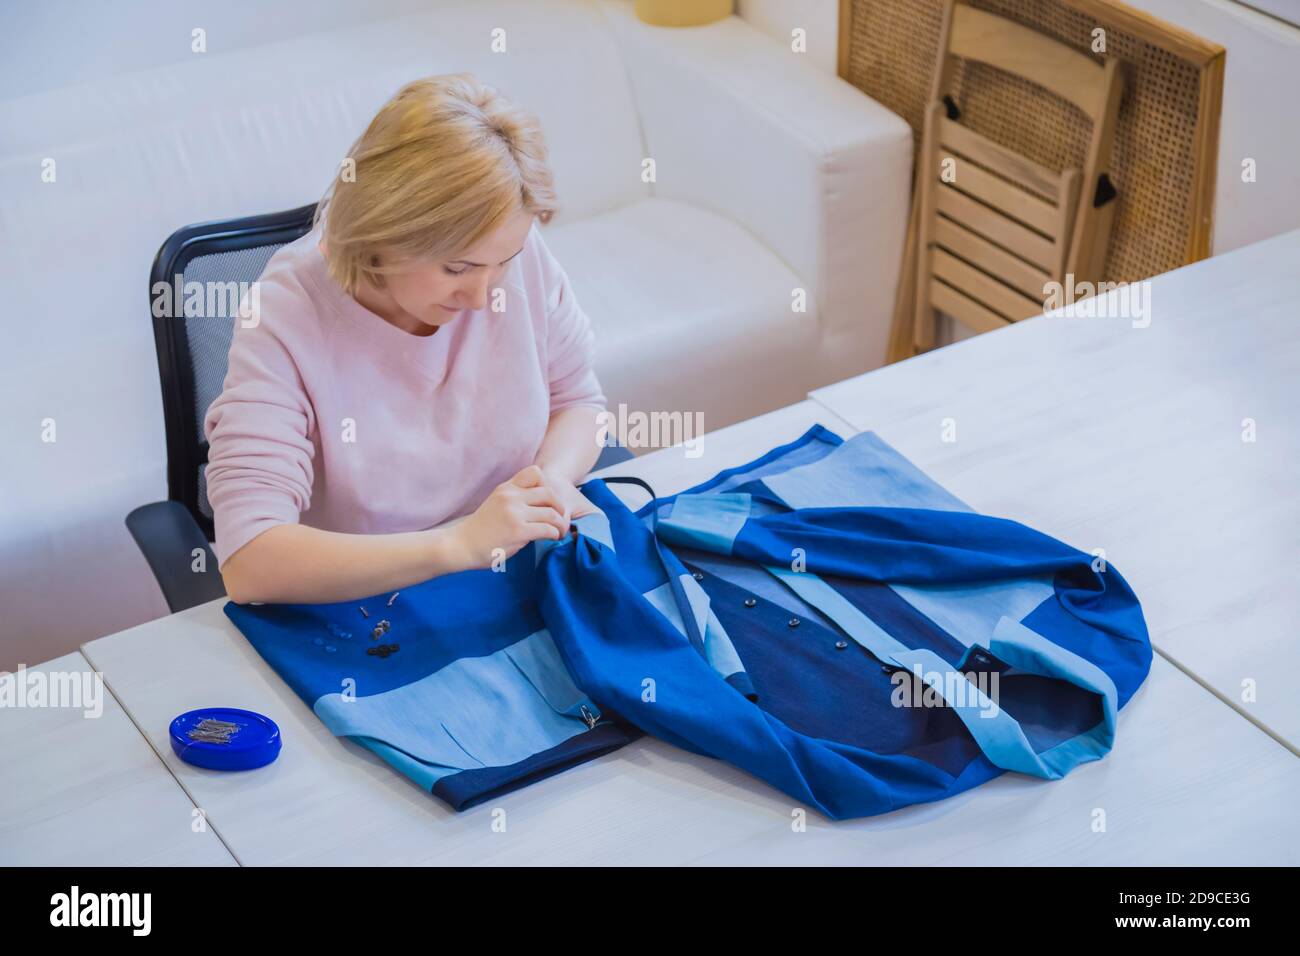 Portrait of professional tailor, designer sitting and measuring blue suit jacket for sewing at atelier. Fashion, clothing, small business, industry Stock Photo